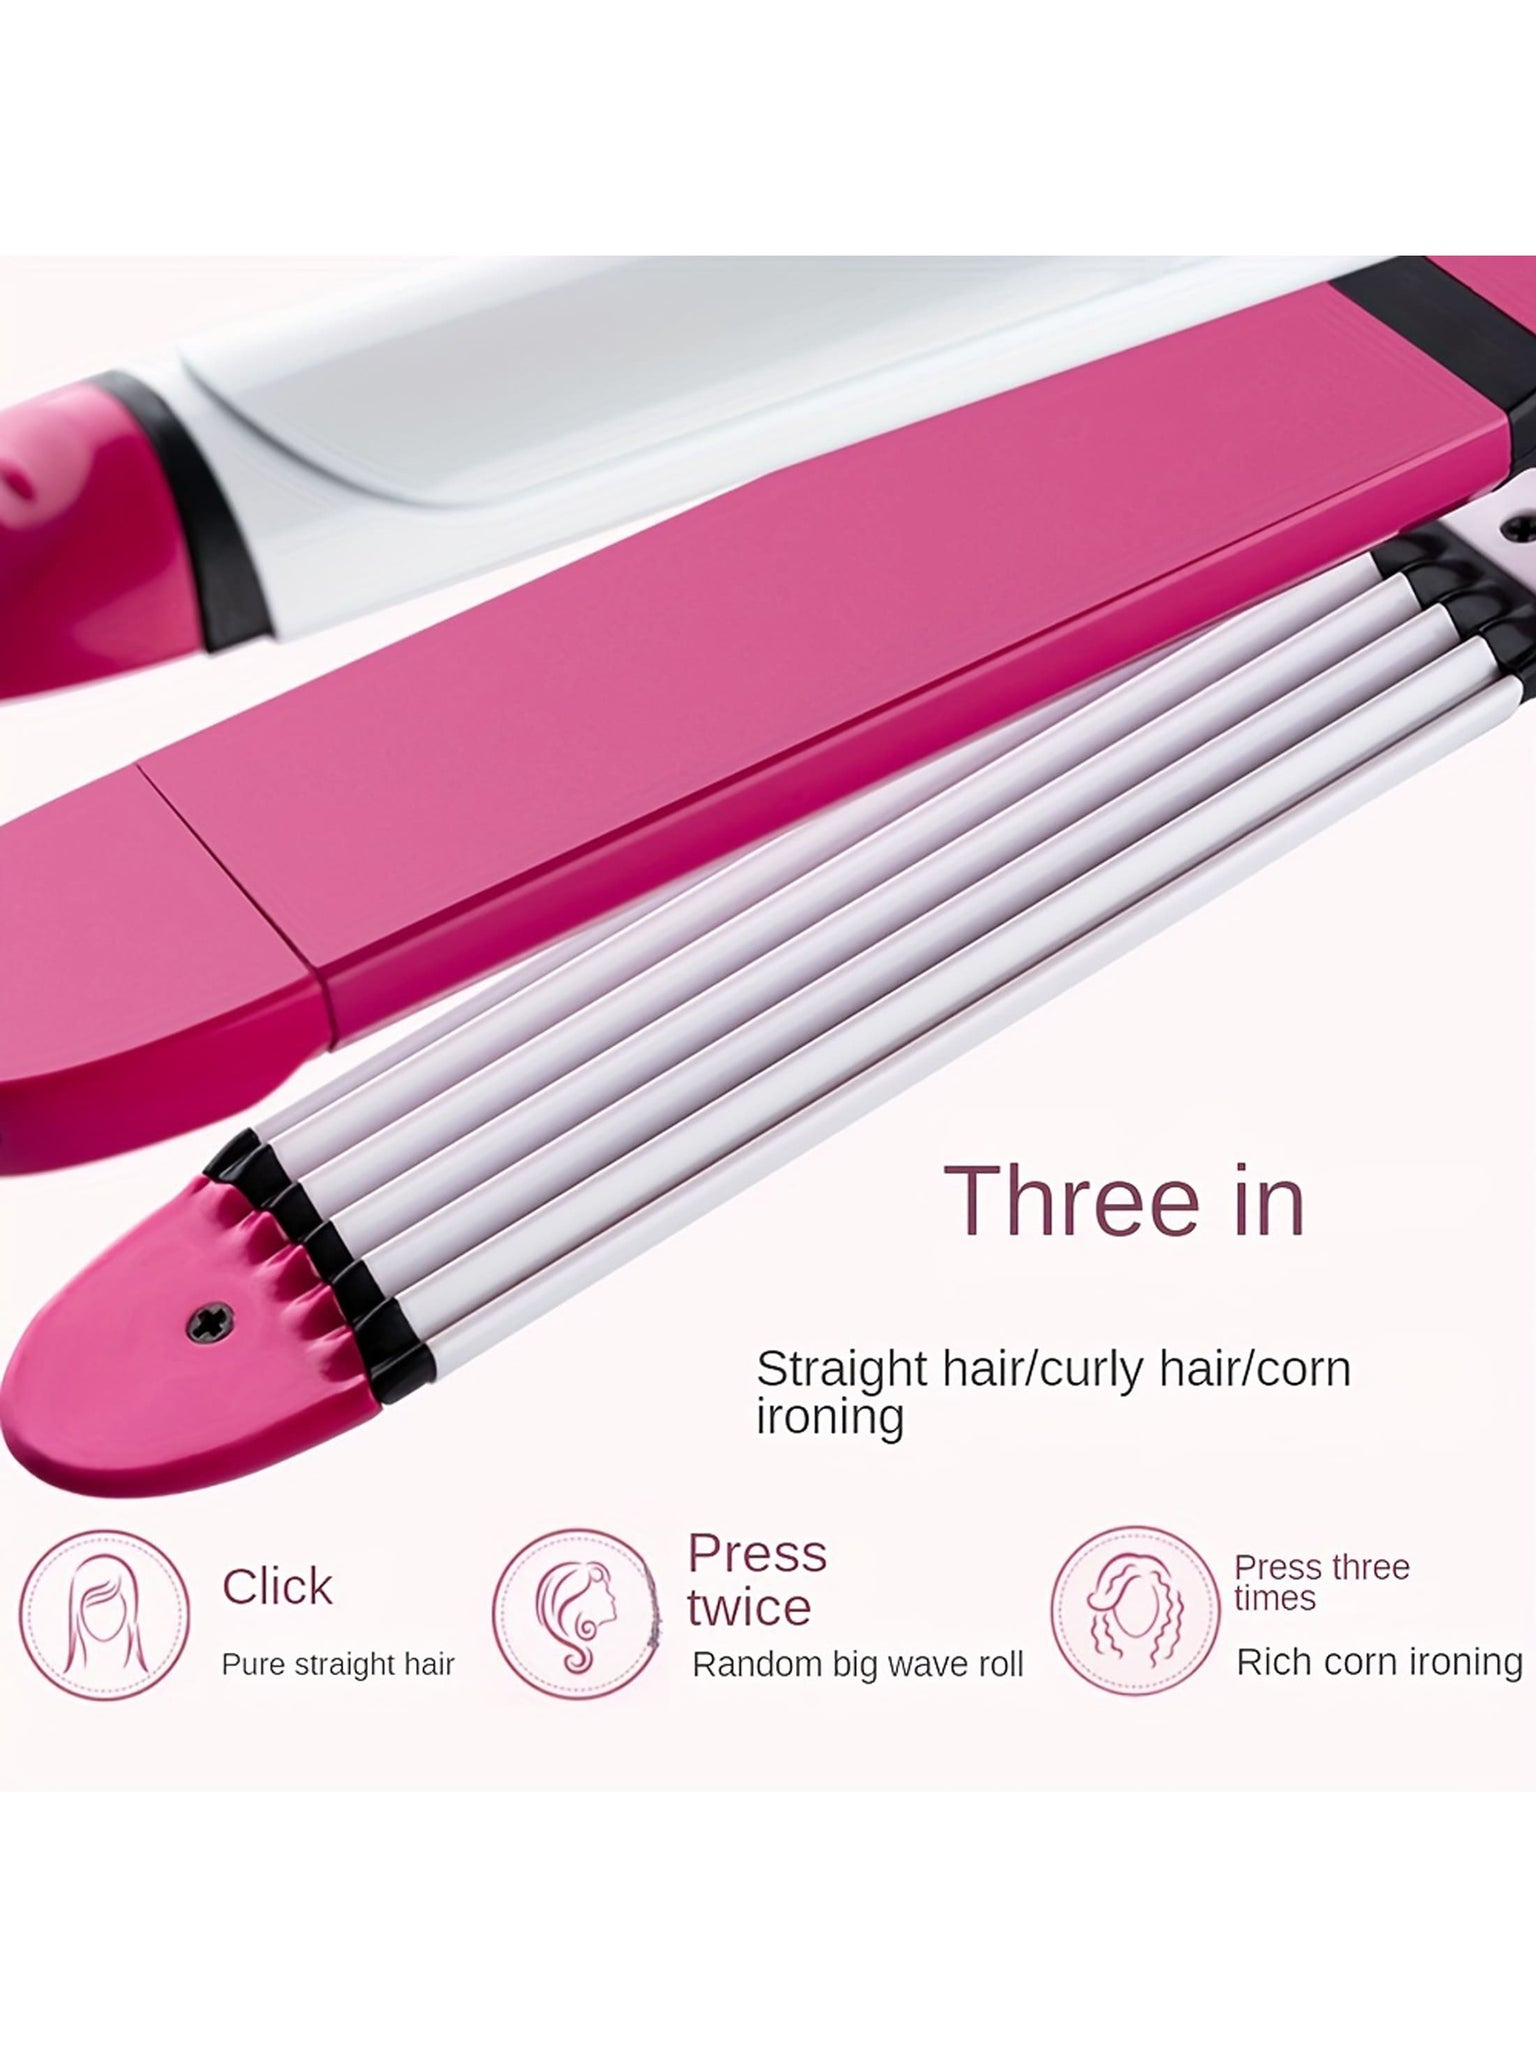 3-in-1 Ceramic Hair Curling Iron: Straighten, Crimp & Style Your Hair Instantly!-Hot Pink-3